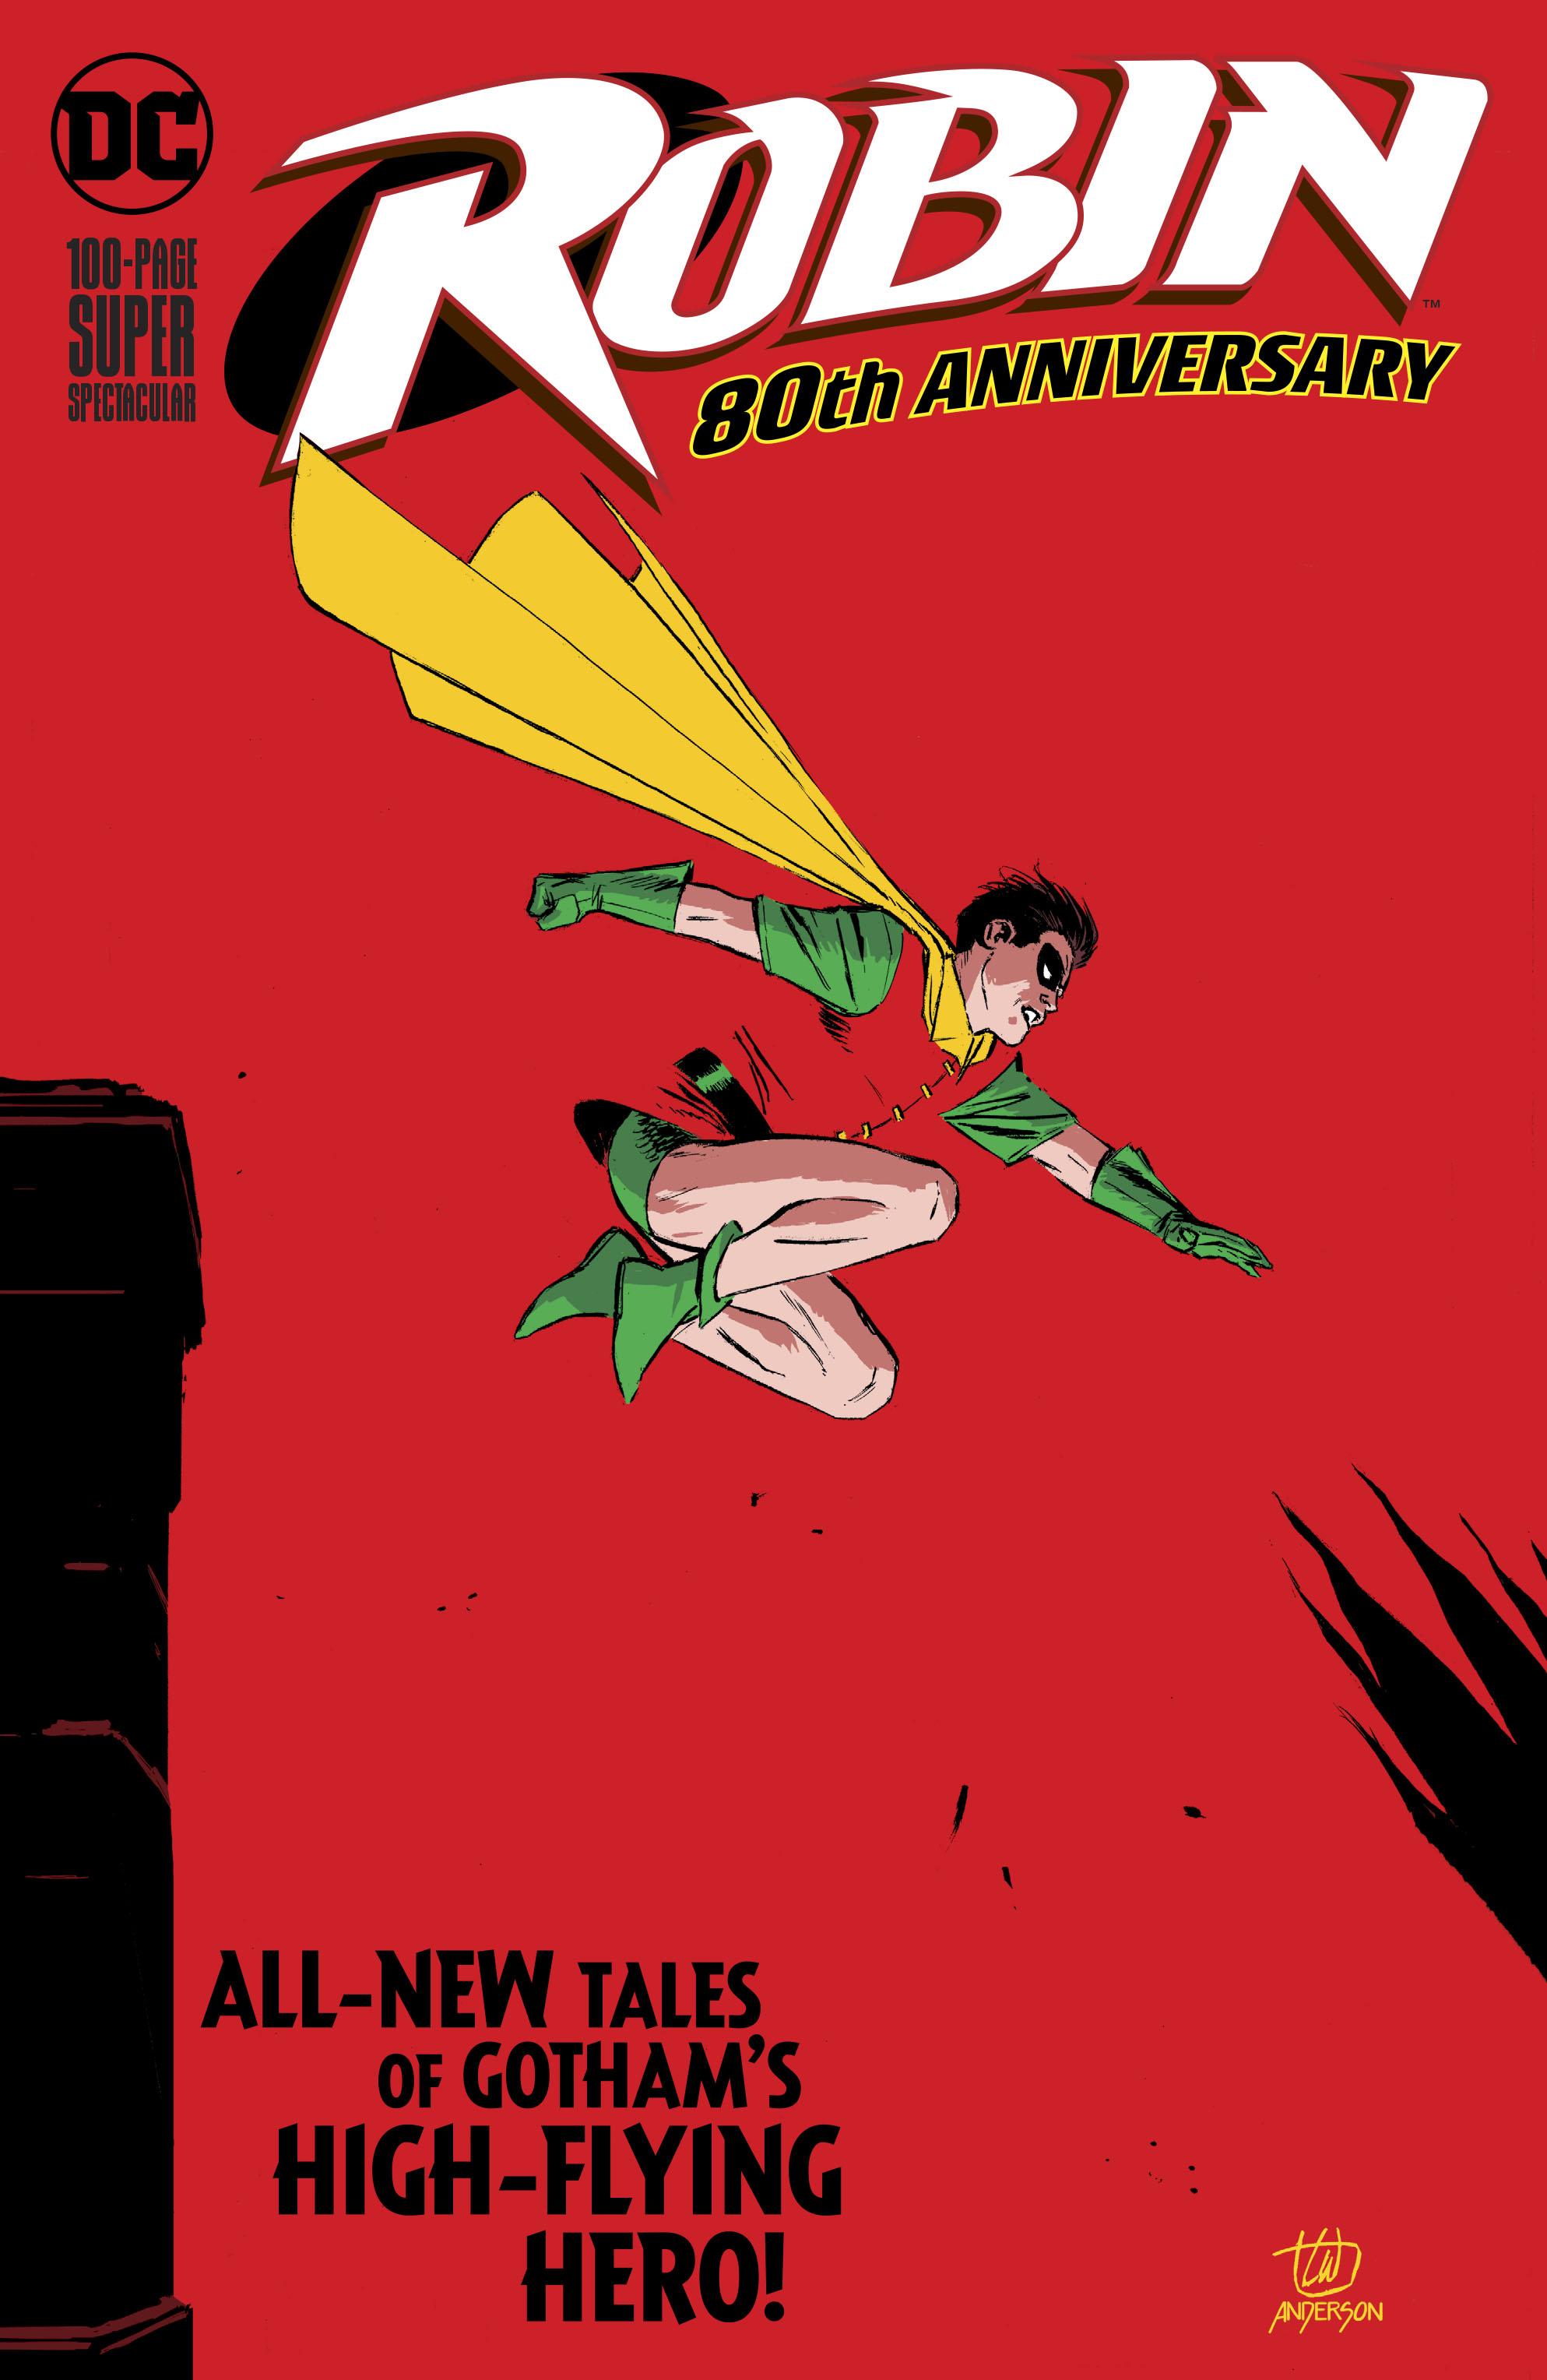 Robin 80th Anniversary 100-Page Super Spectacular Vol. 1 #1